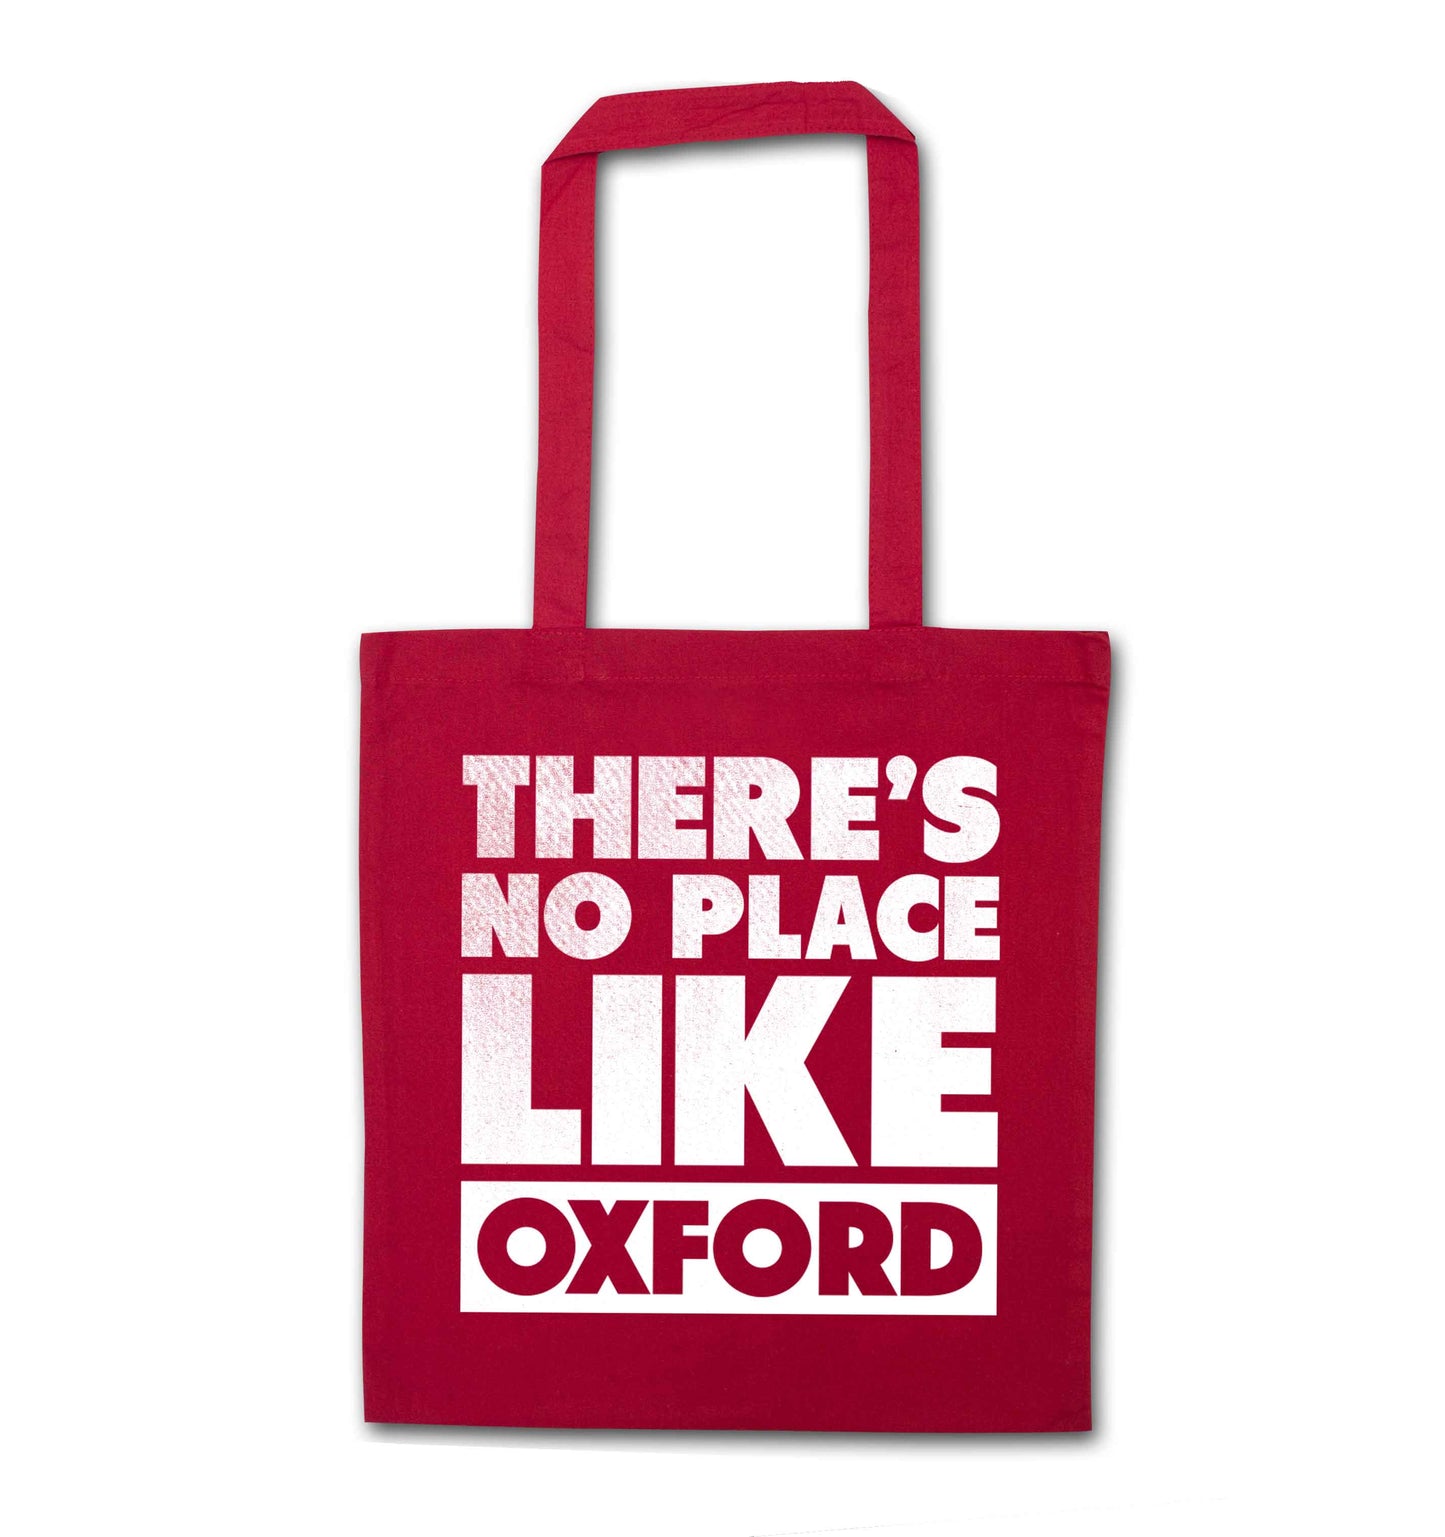 There's no place like Oxford red tote bag